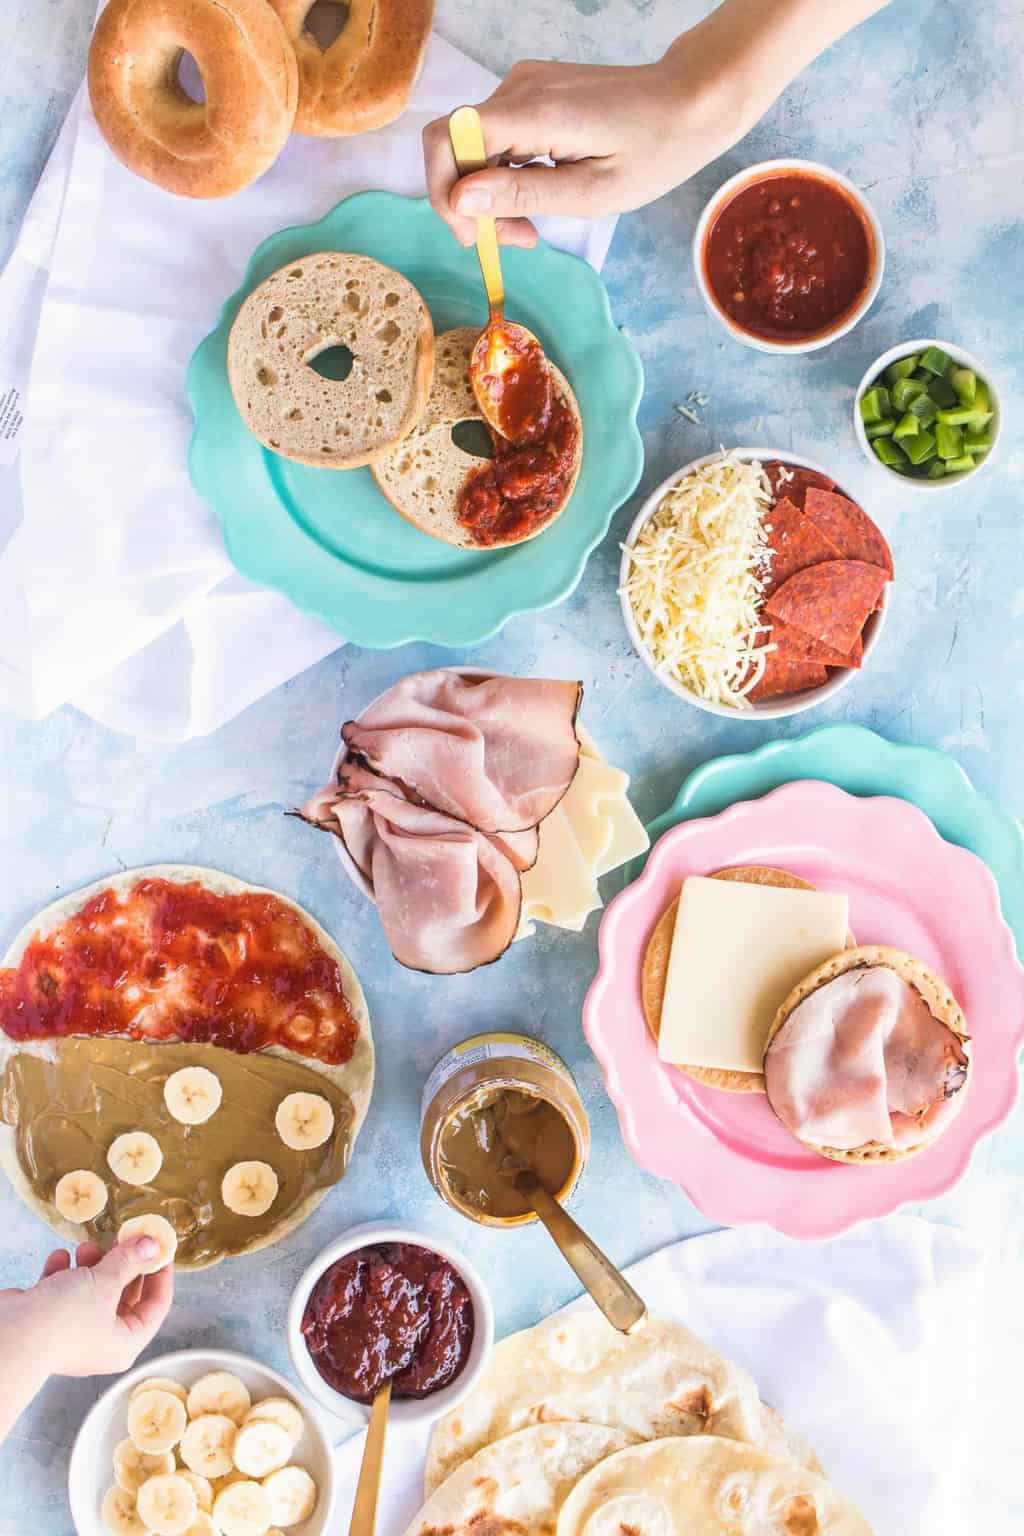 Healthy Kids Lunch Ideas by top Houston lifestyle blogger Ashley Rose of Sugar & Cloth